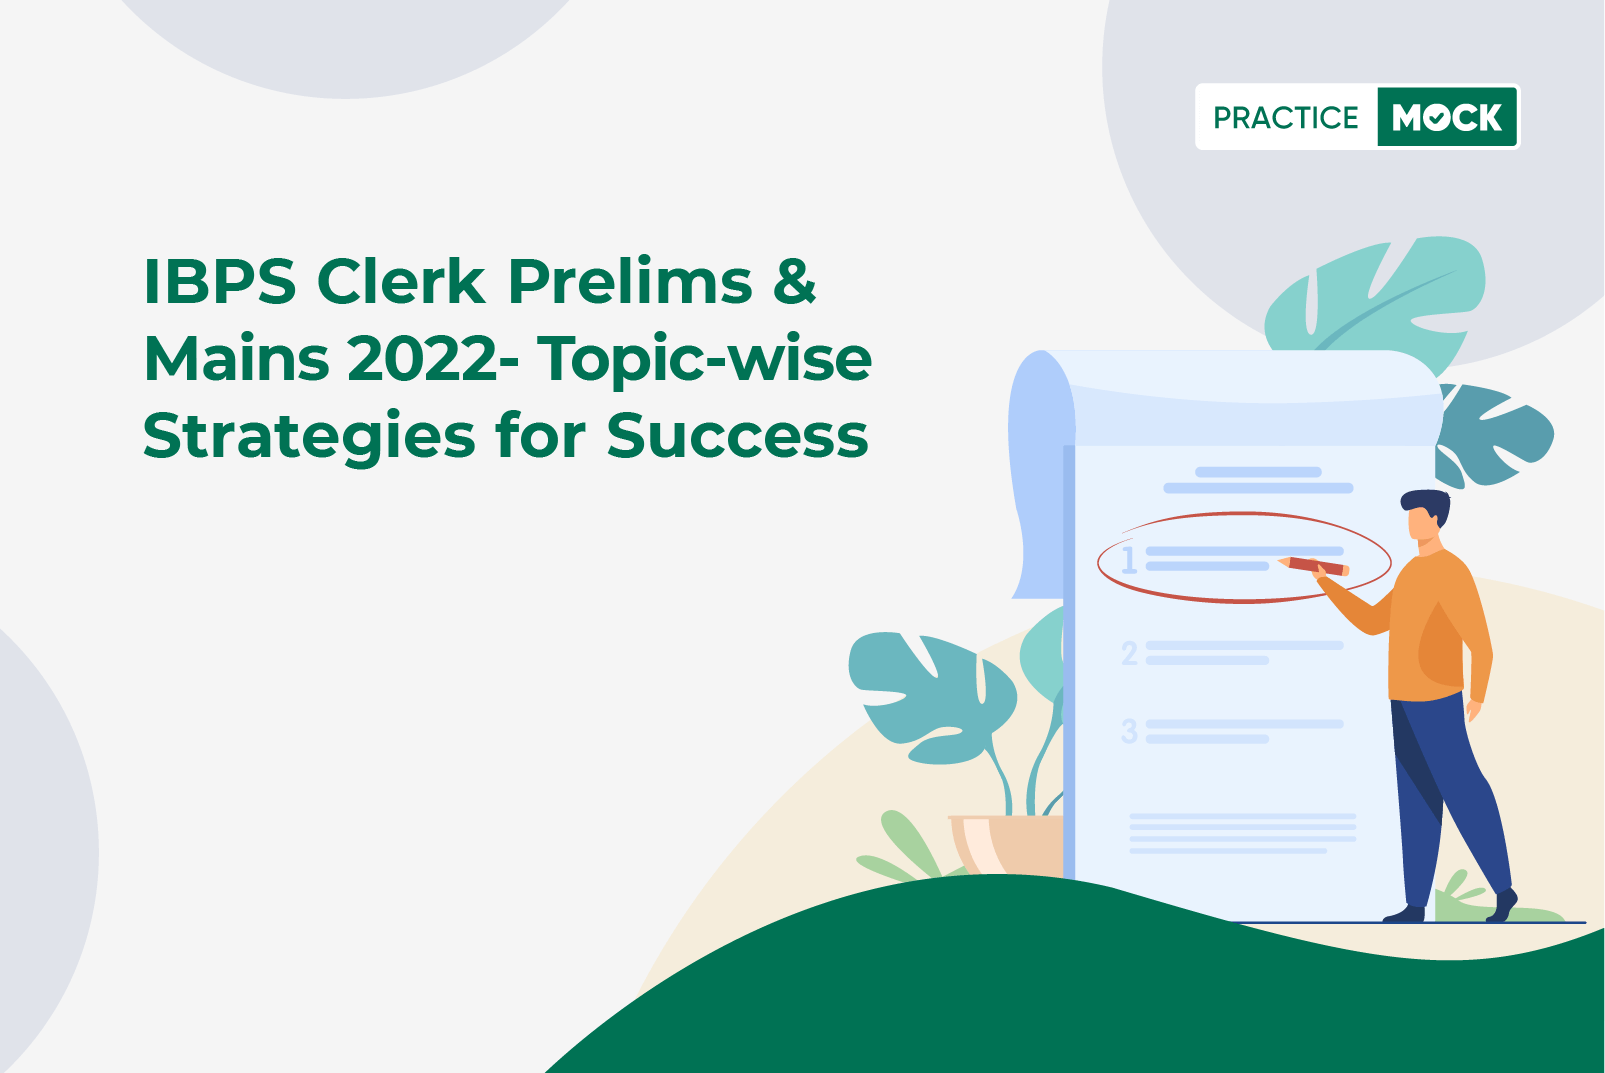 IBPS Clerk Prelims & Mains 2022-Topic-wise Strategies for Success